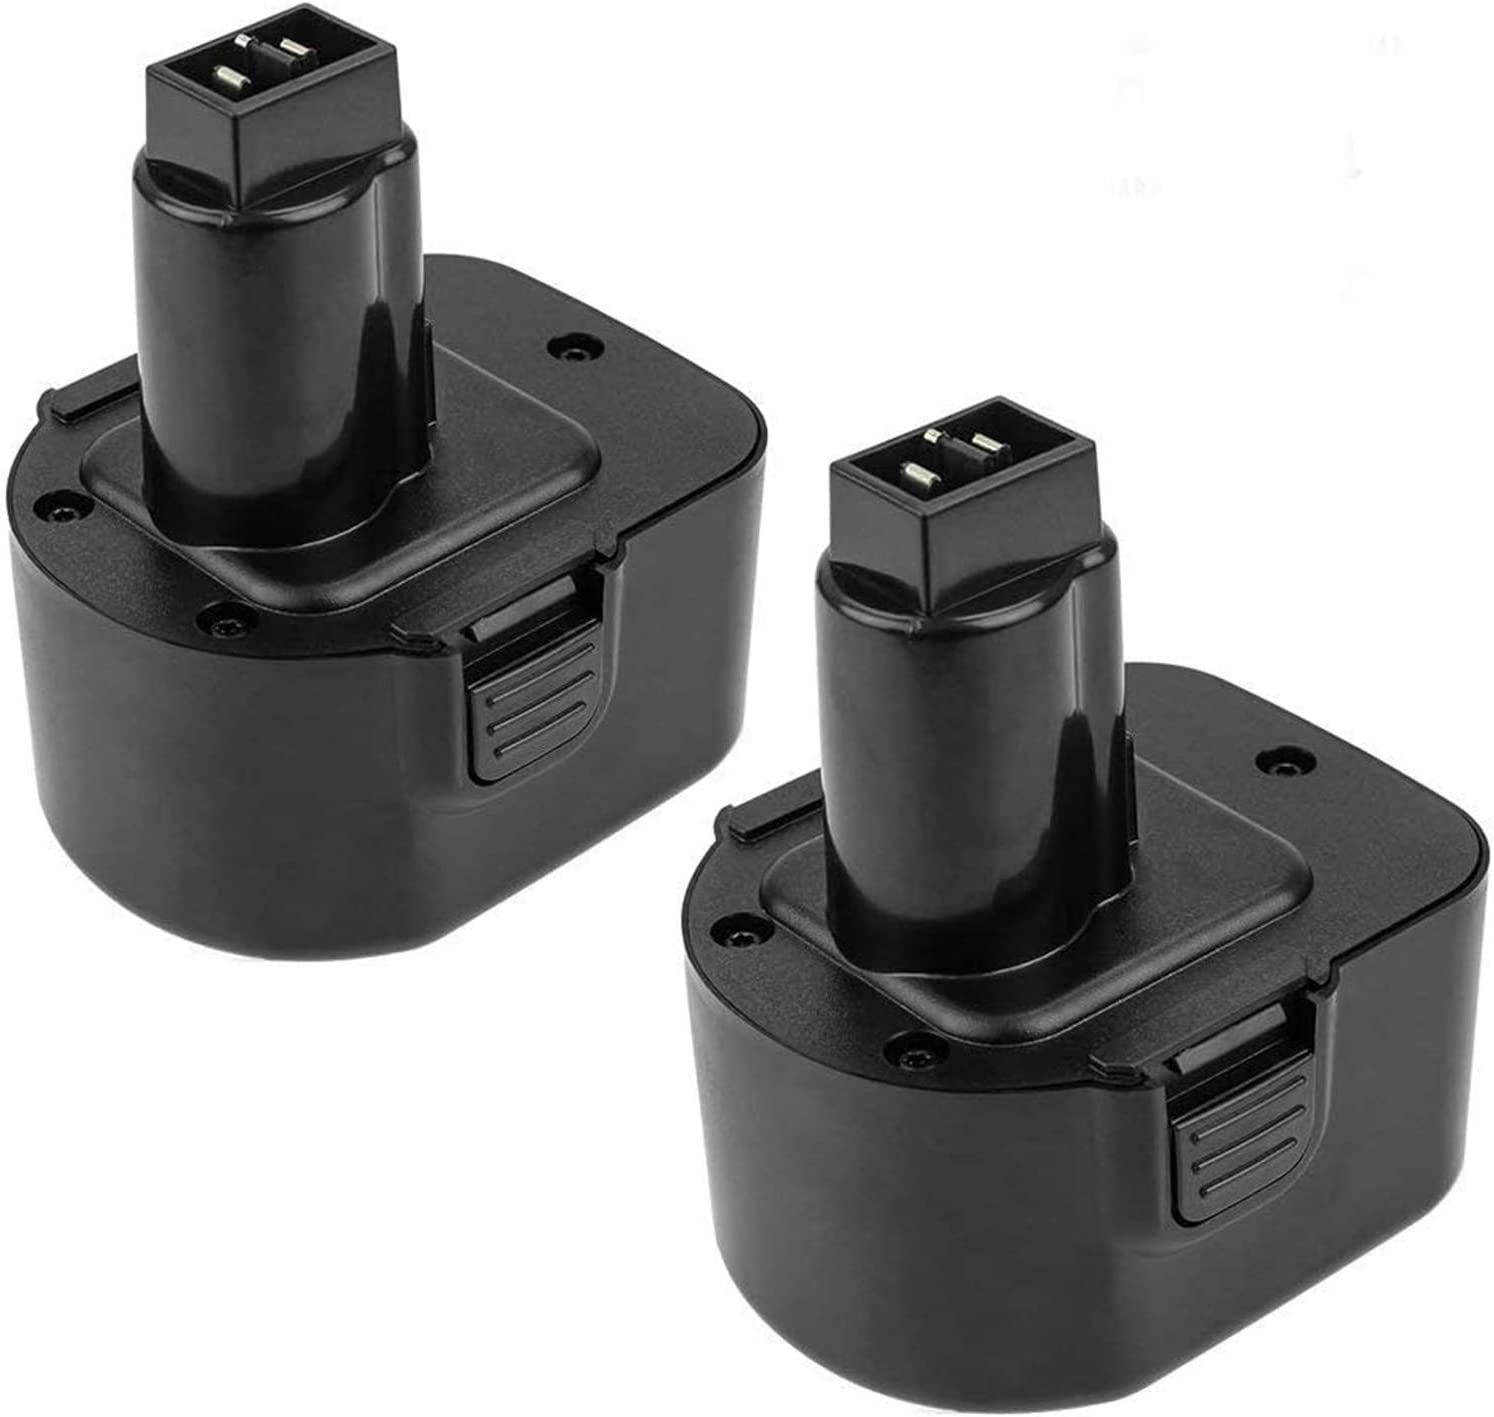 2 Pack 20V MAX 4.5Ah Replacement Battery for Black & Decker